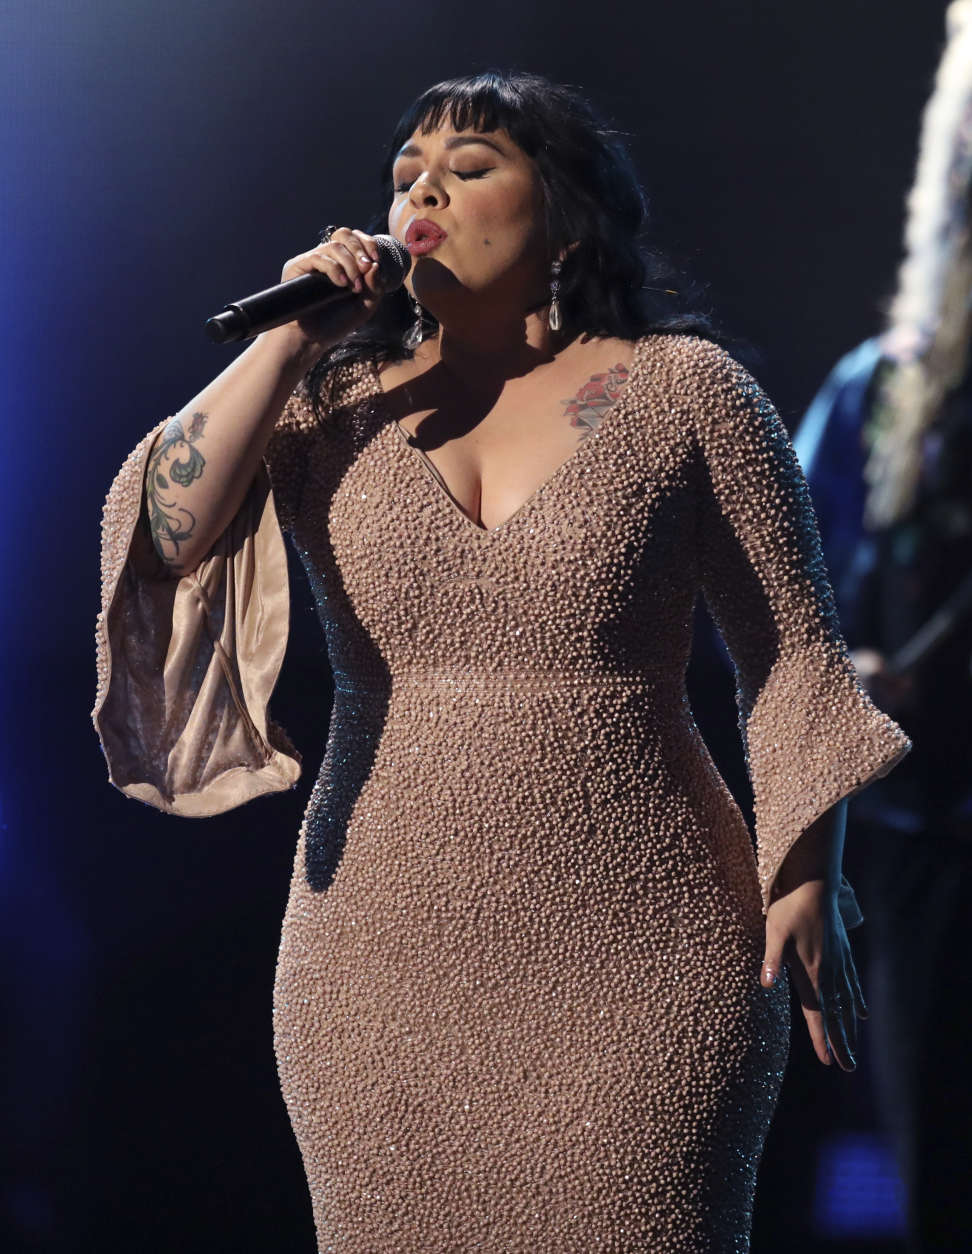 Mexican singer Carla Morrison performs at the 59th annual Grammy Awards on Sunday, Feb. 12, 2017, in Los Angeles. (Photo by Matt Sayles/Invision/AP)